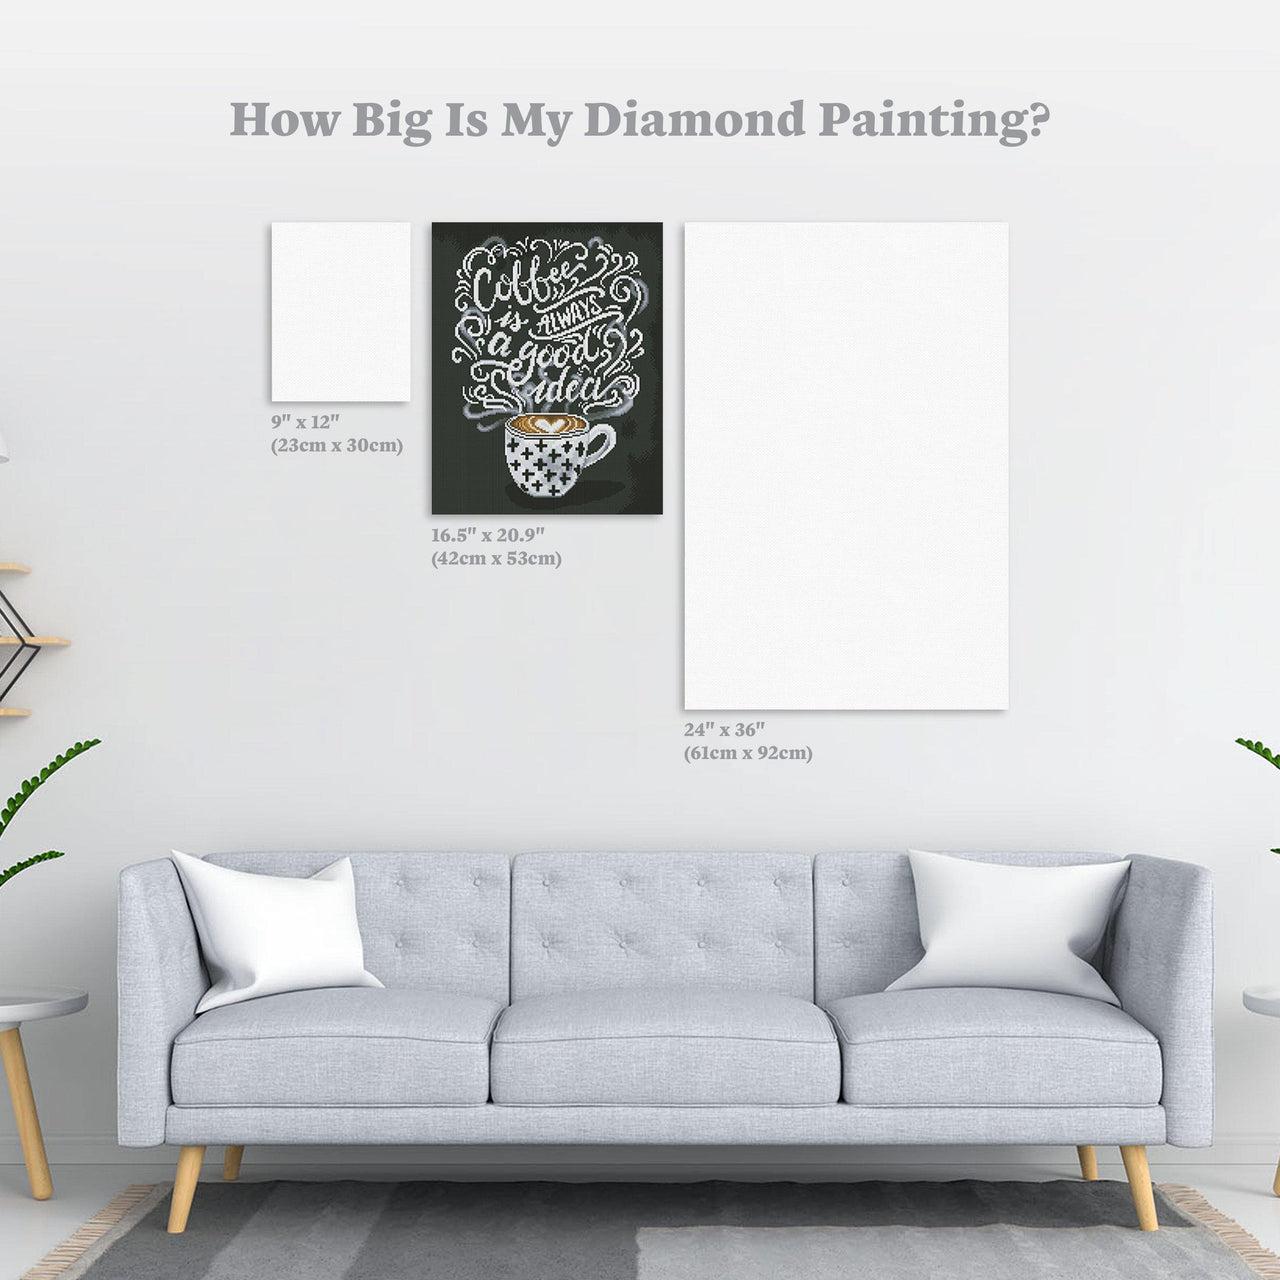 Diamond Painting Coffee Is Always A Good Idea 16.5" x 20.9″ (42cm x 53cm) / Round With 15 Colors Including 1 AB / 27,676